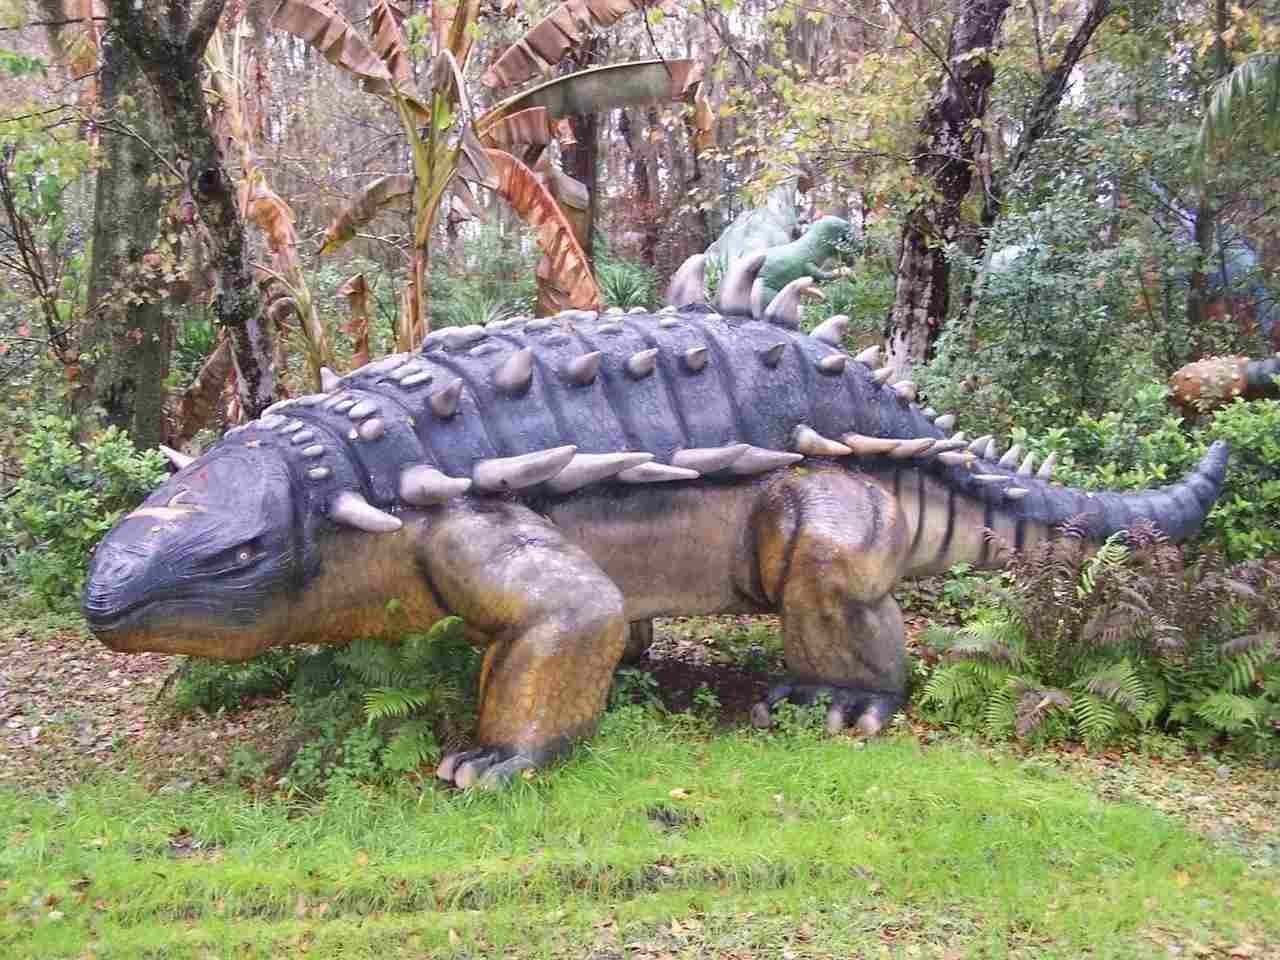 The spikes protected the dinosaurs from other predator dinosaurs.